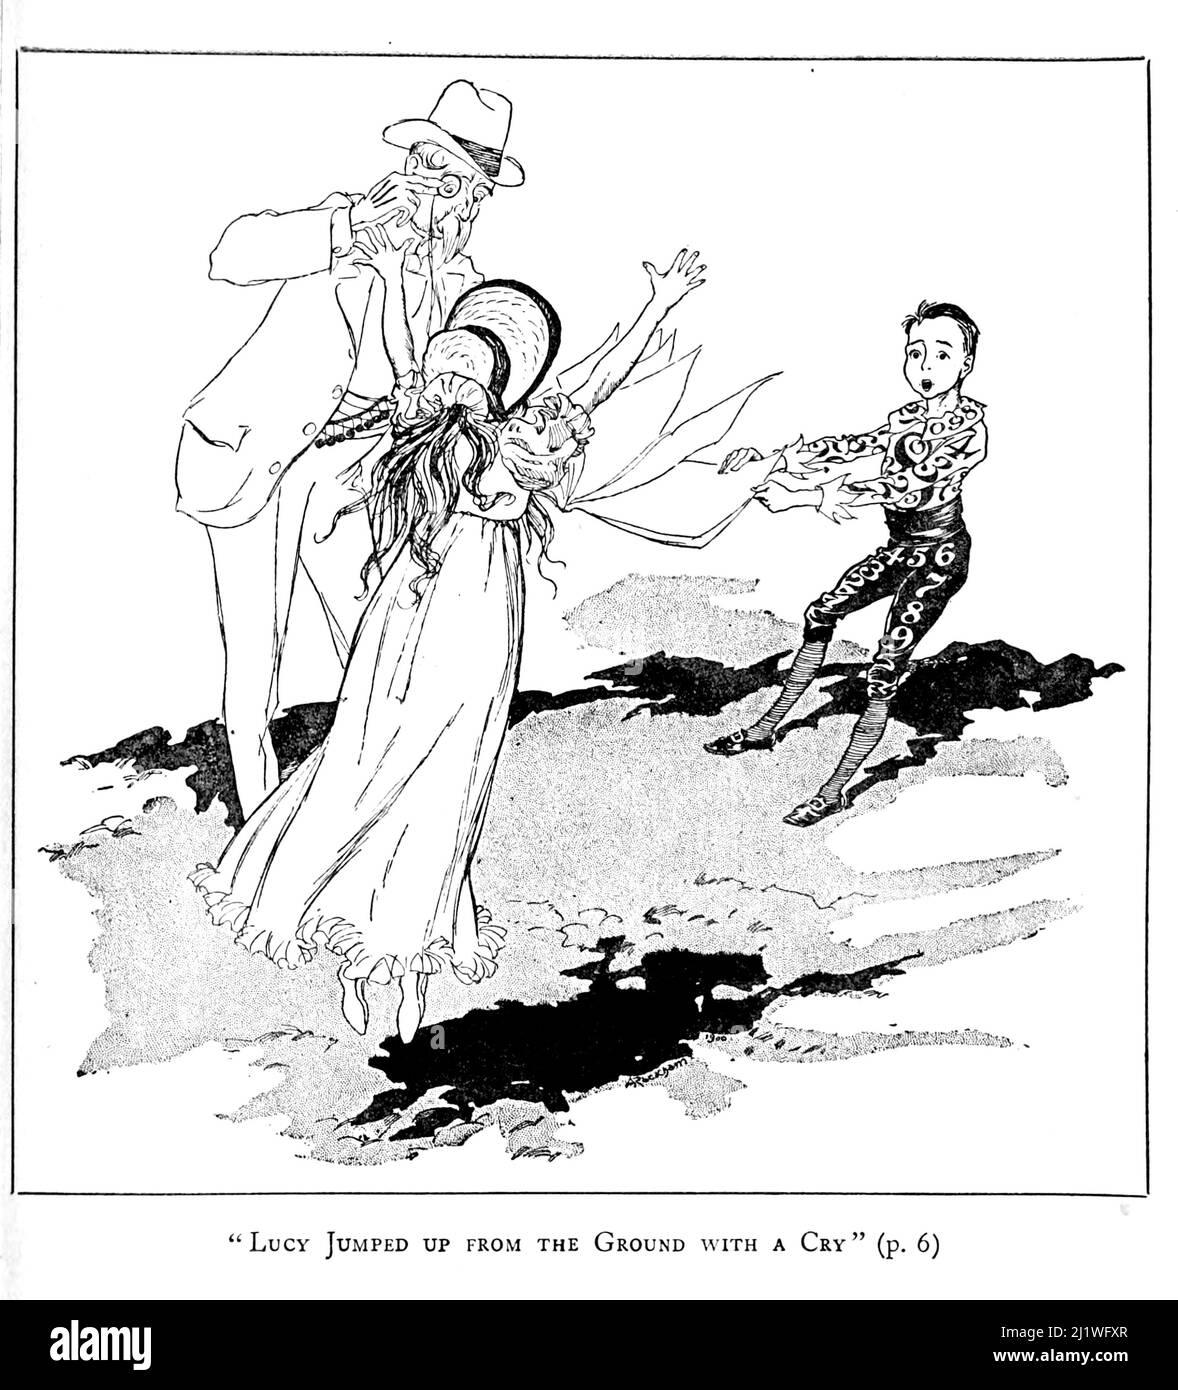 Lucy Jumped up from the Ground with a Cry from the book ' The book of Betty Barber ' by Maggie Browne, the pen-name of Margaret Andrewes née Hamer (1864-1937), Illustrated by Arthur Rackham,  Publication date 1914 Publisher Boston, R. G. Badger Stock Photo